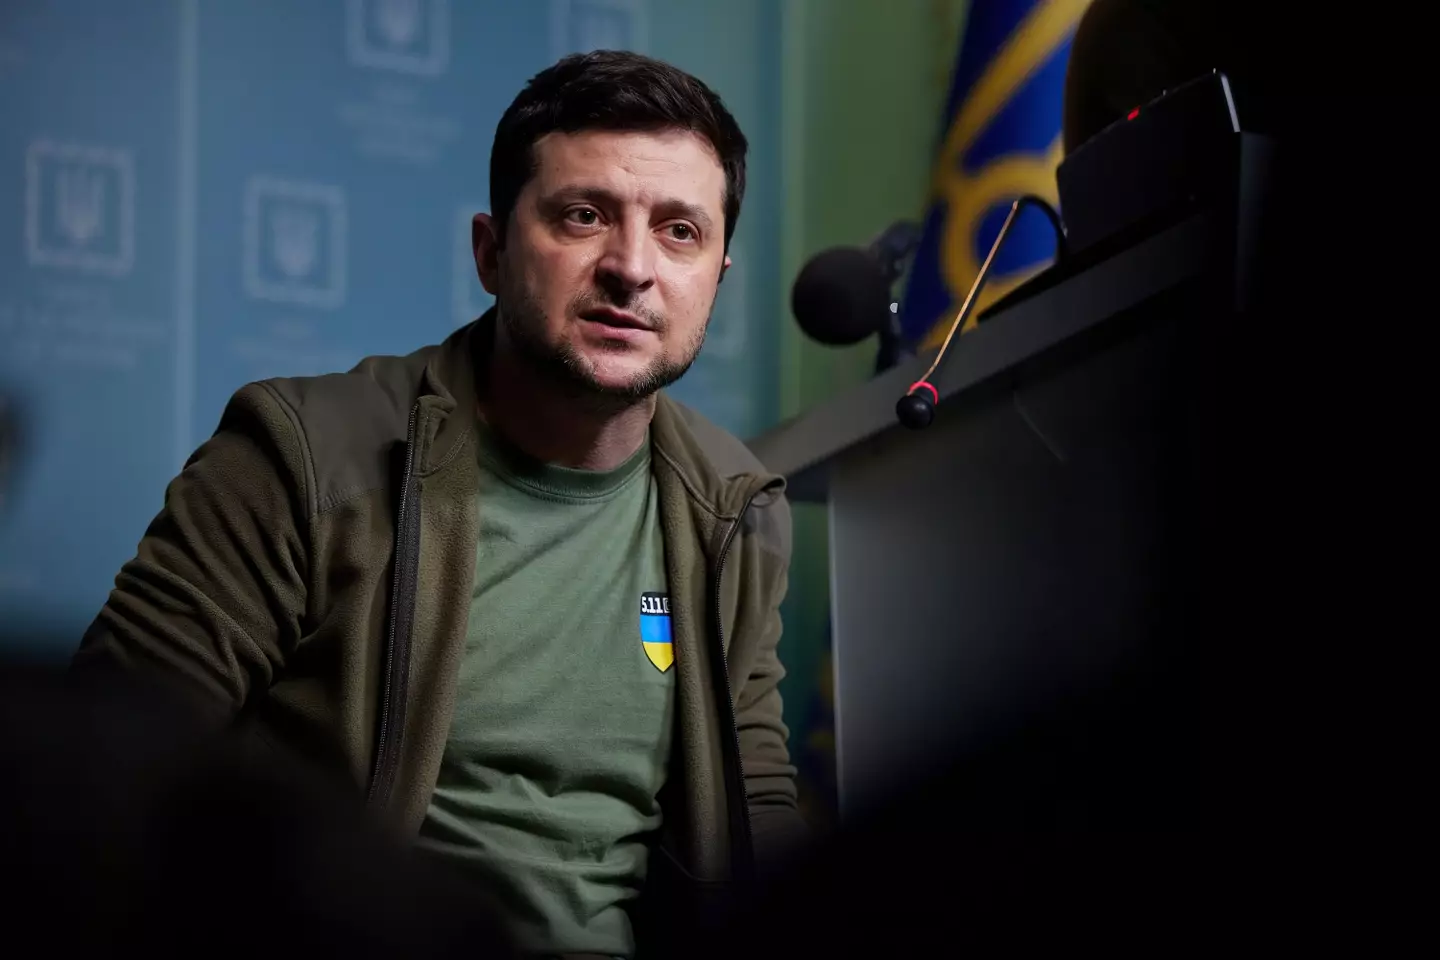 Biden’s comments were praised by Ukrainian president Volodymyr Zelenskyy, who hailed them as ‘the words of a true leader’.